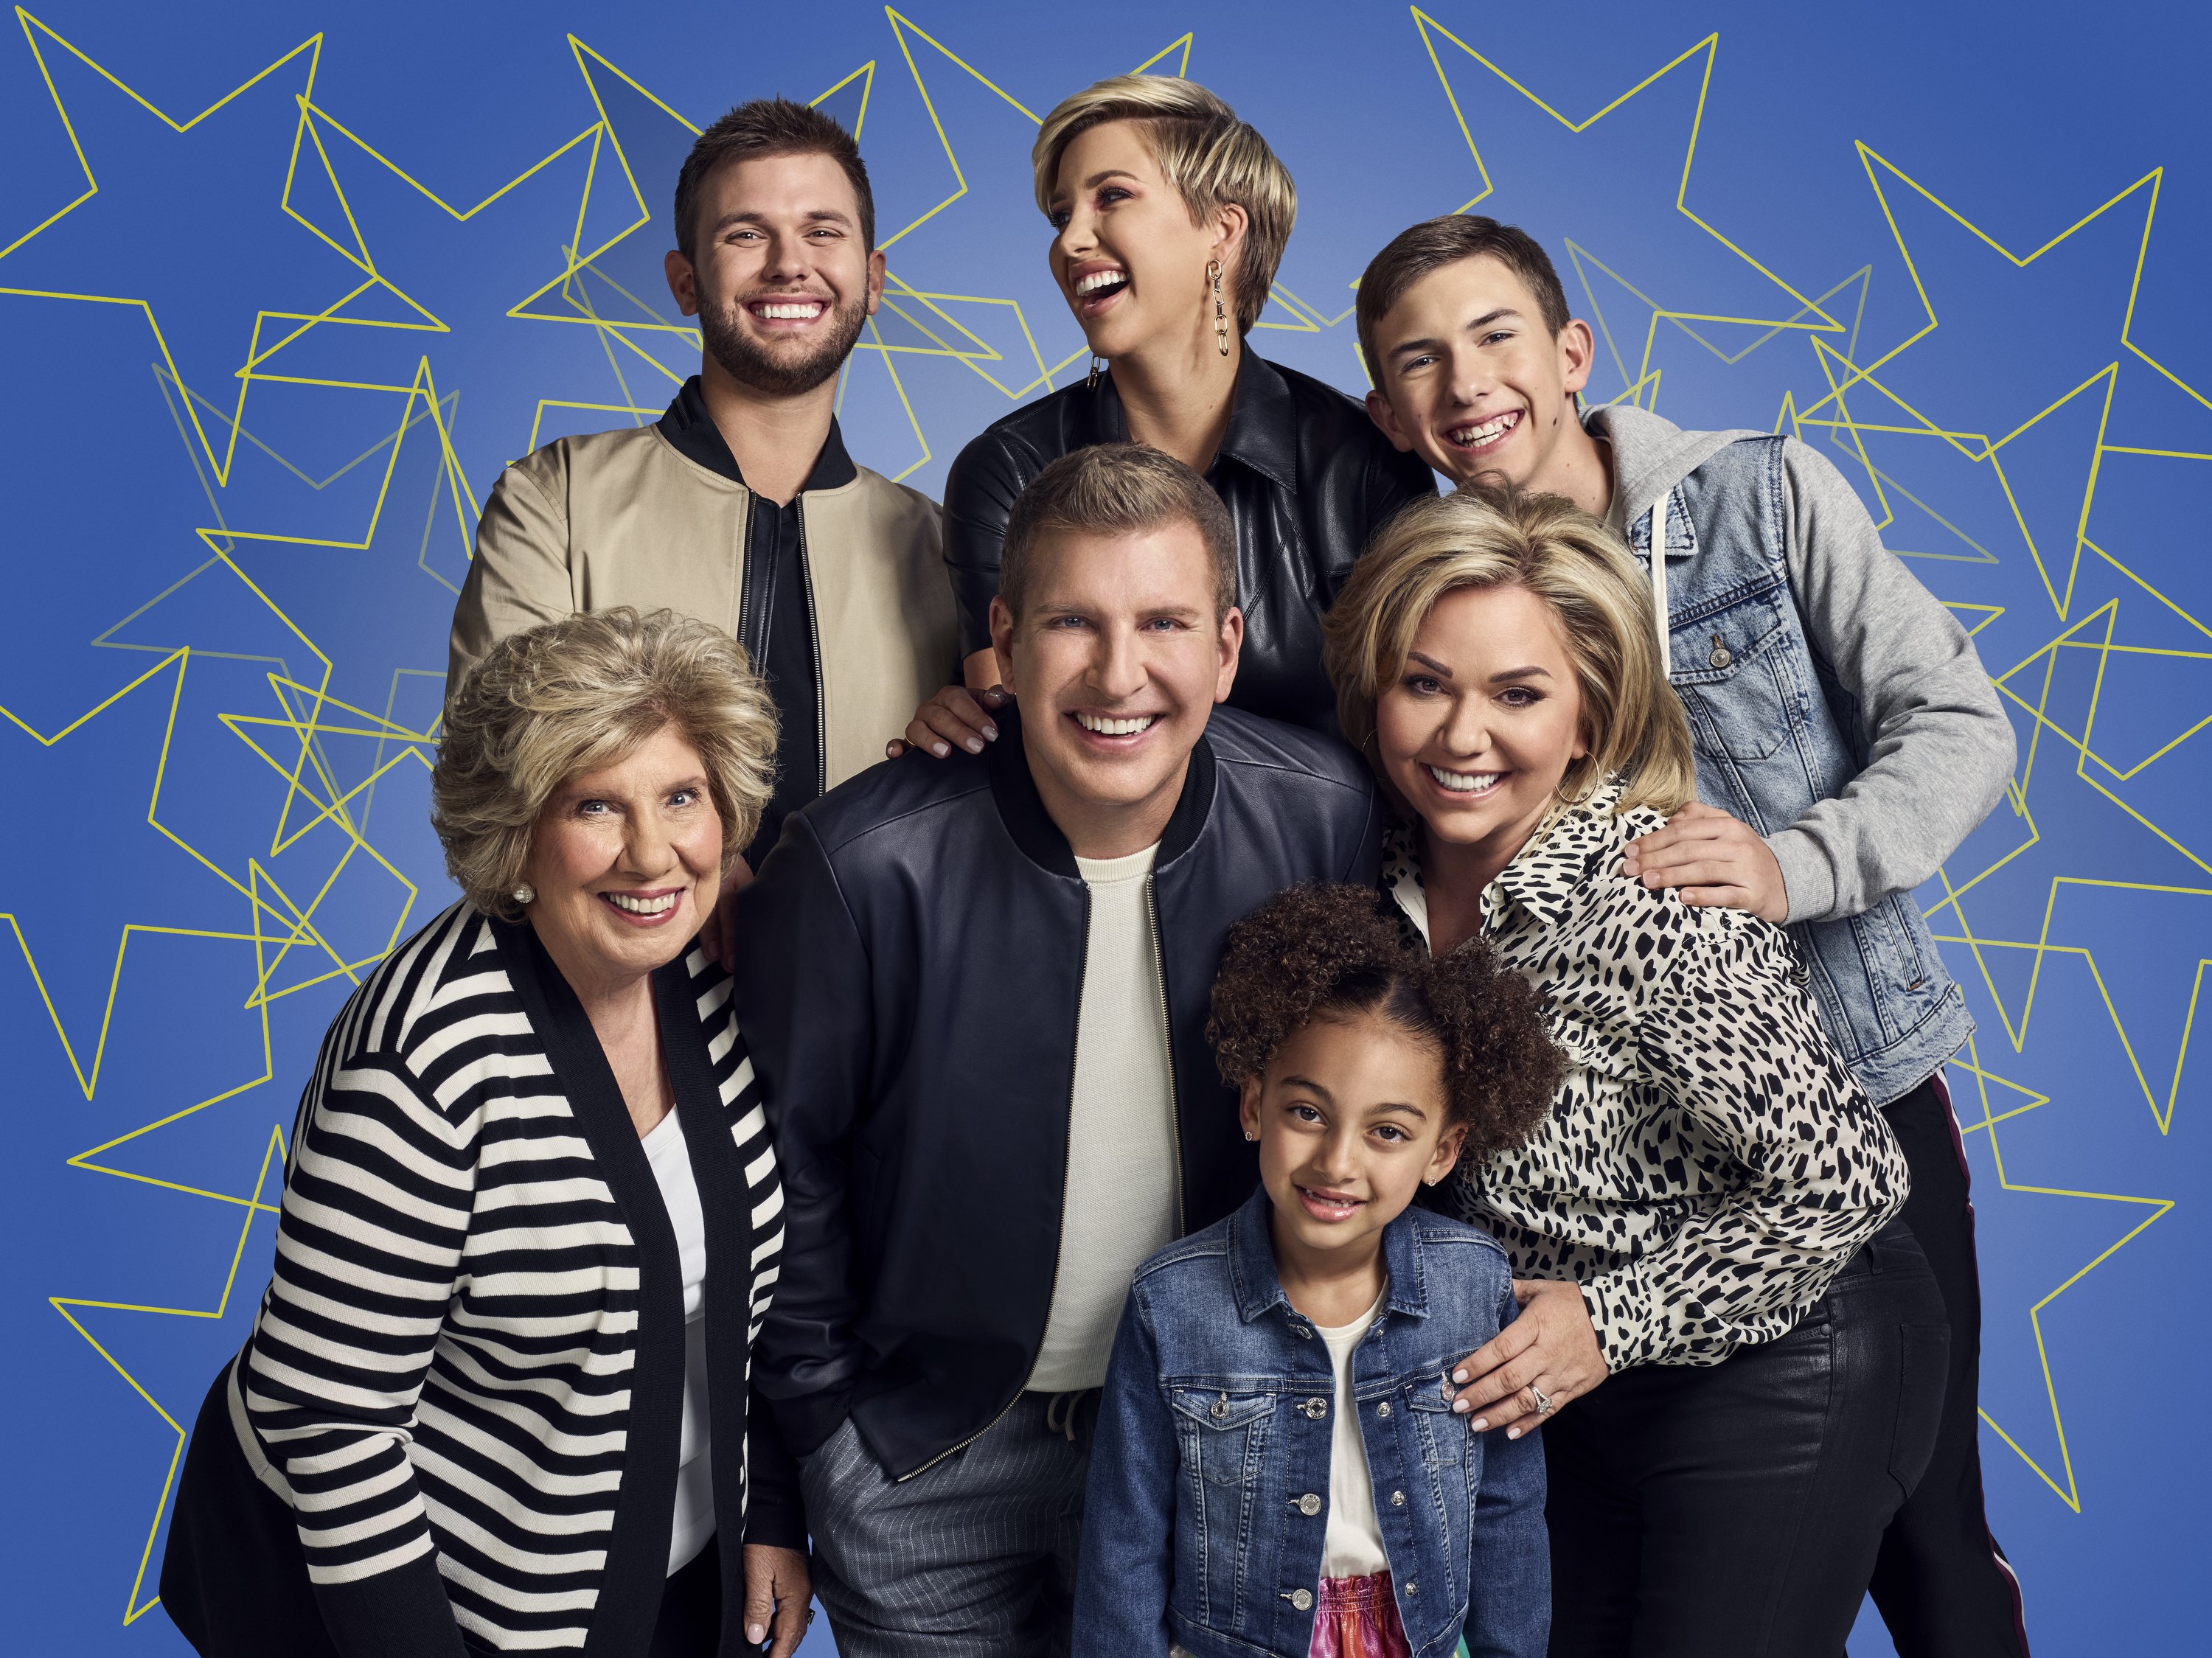 The Chrisley family poses for season eight of "Chrisley Knows Best" on March 9, 2020 | Photo: Getty Images